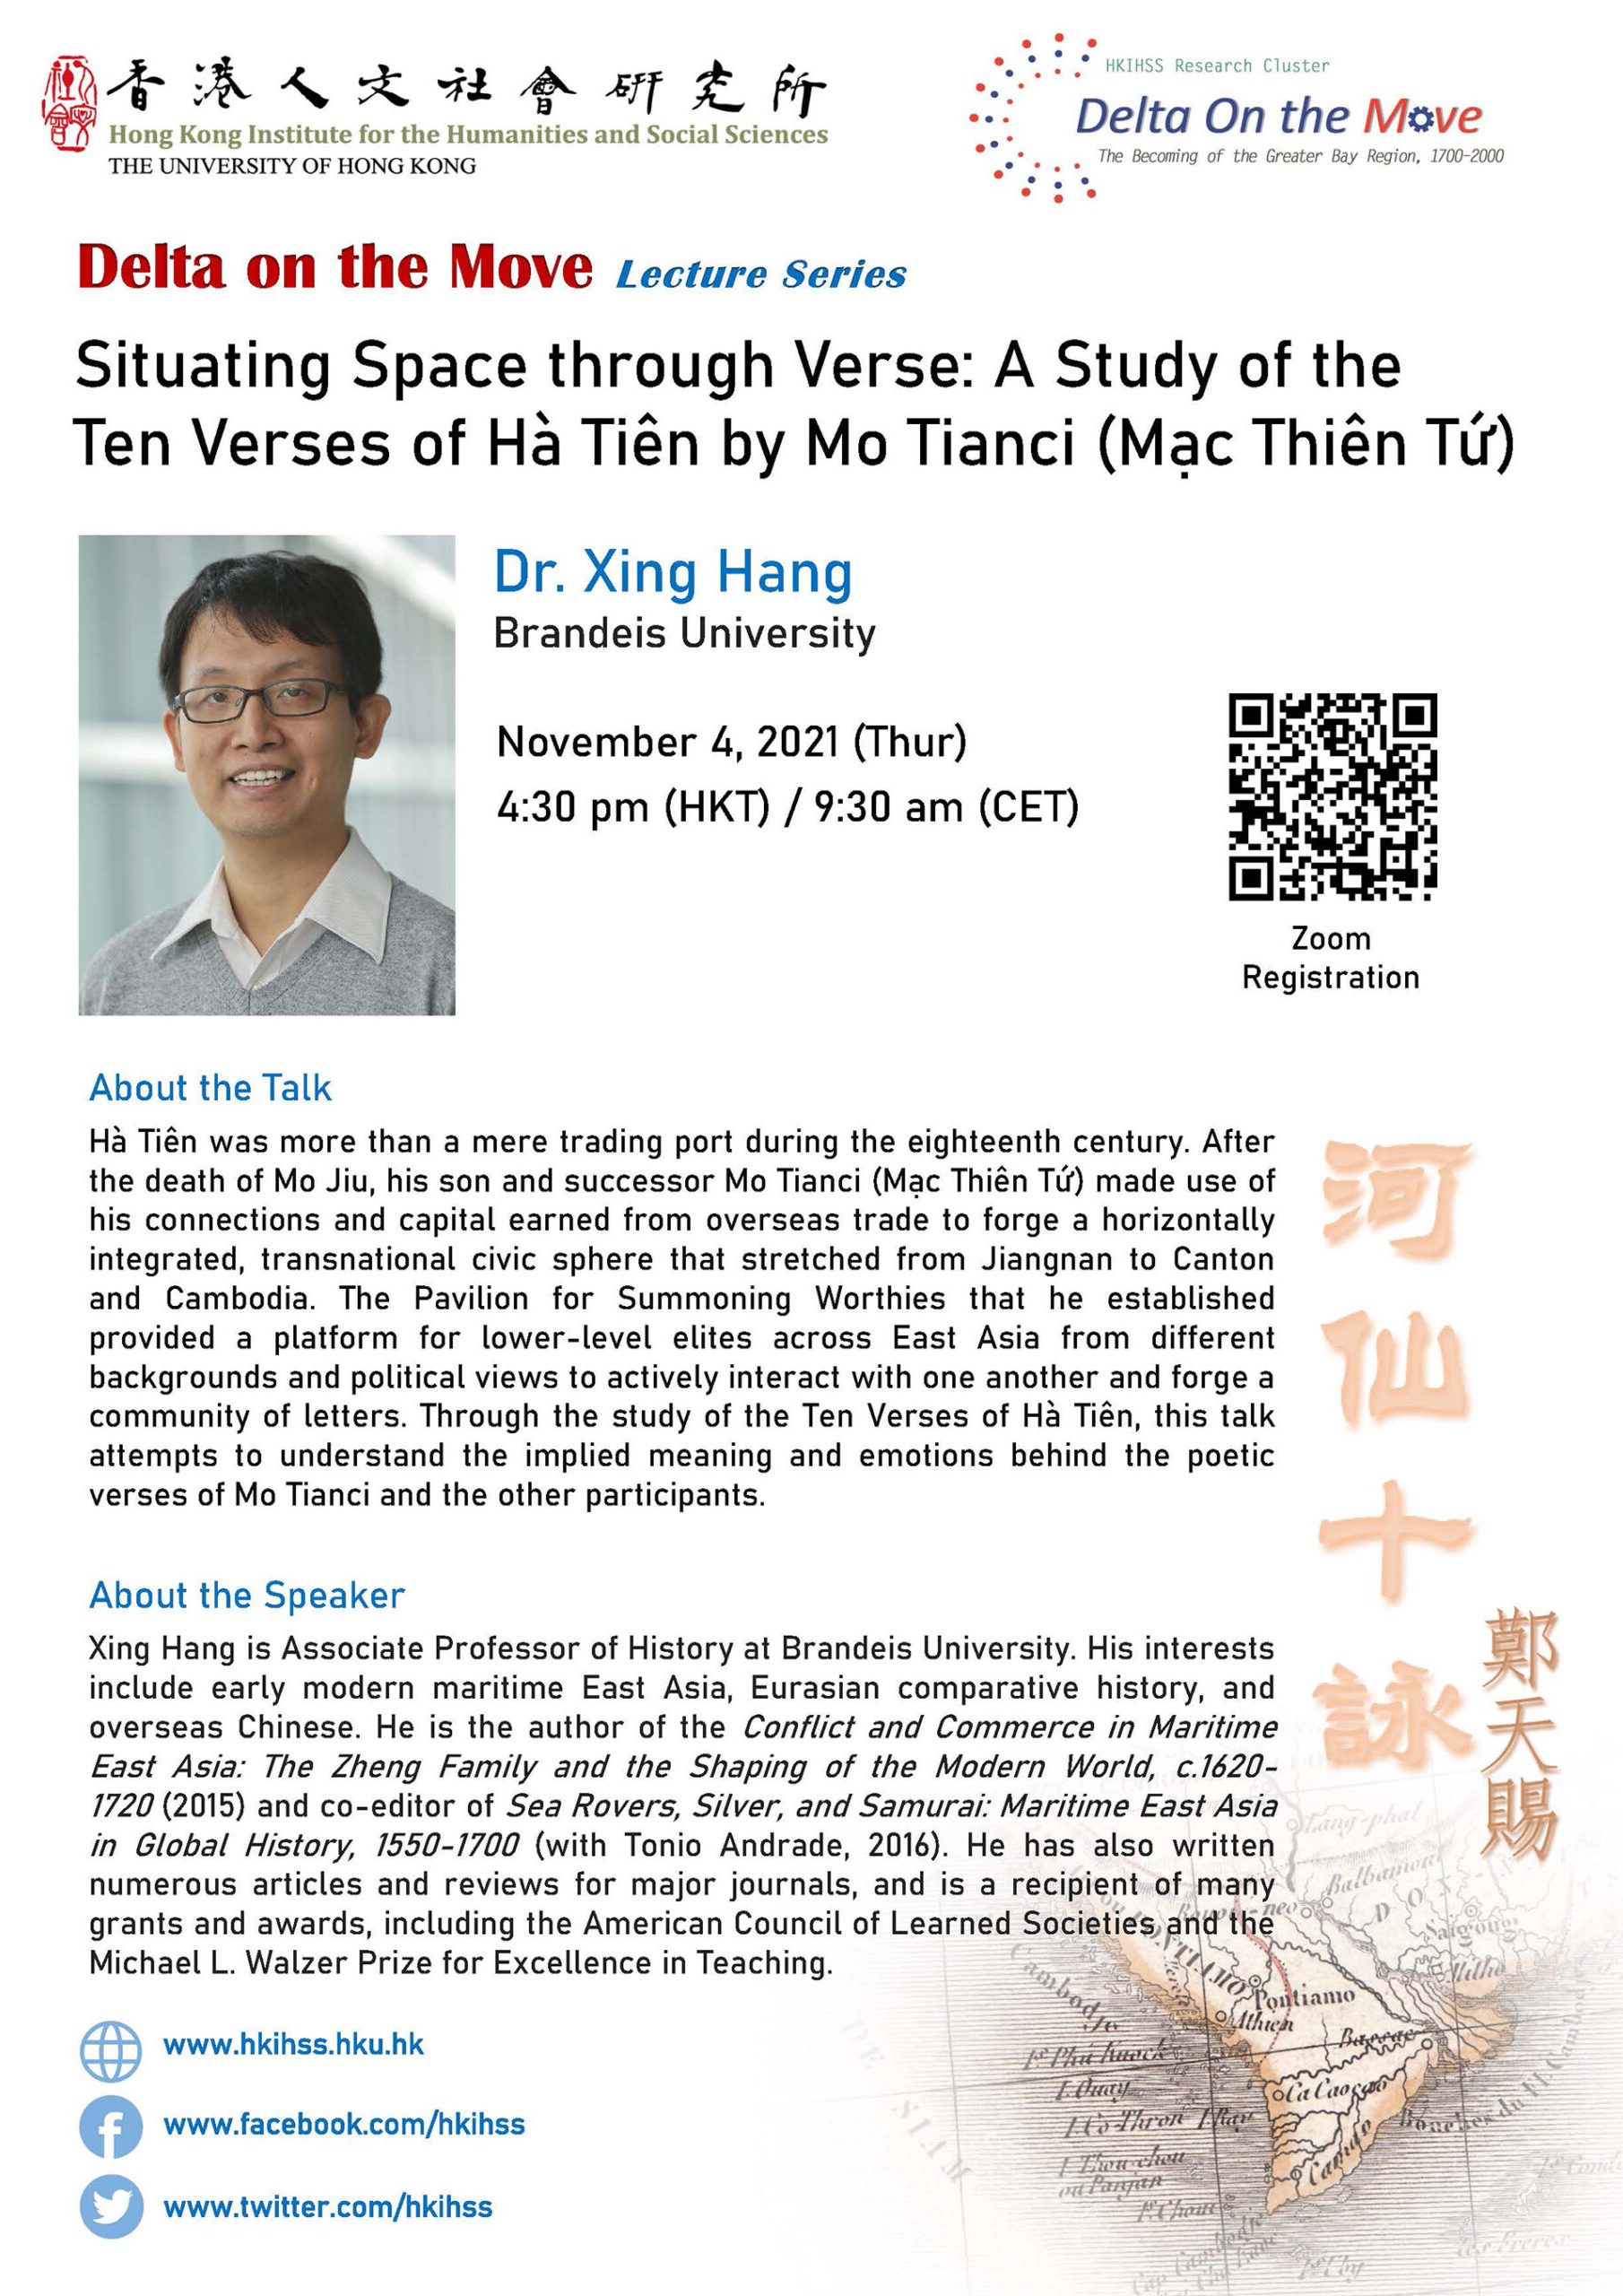 Delta on the Move Lecture Series “Situating Space through Verse: A Study of the Ten Verses of Hà Tiên by Mo Tianci (Mạc Thiên Tứ)